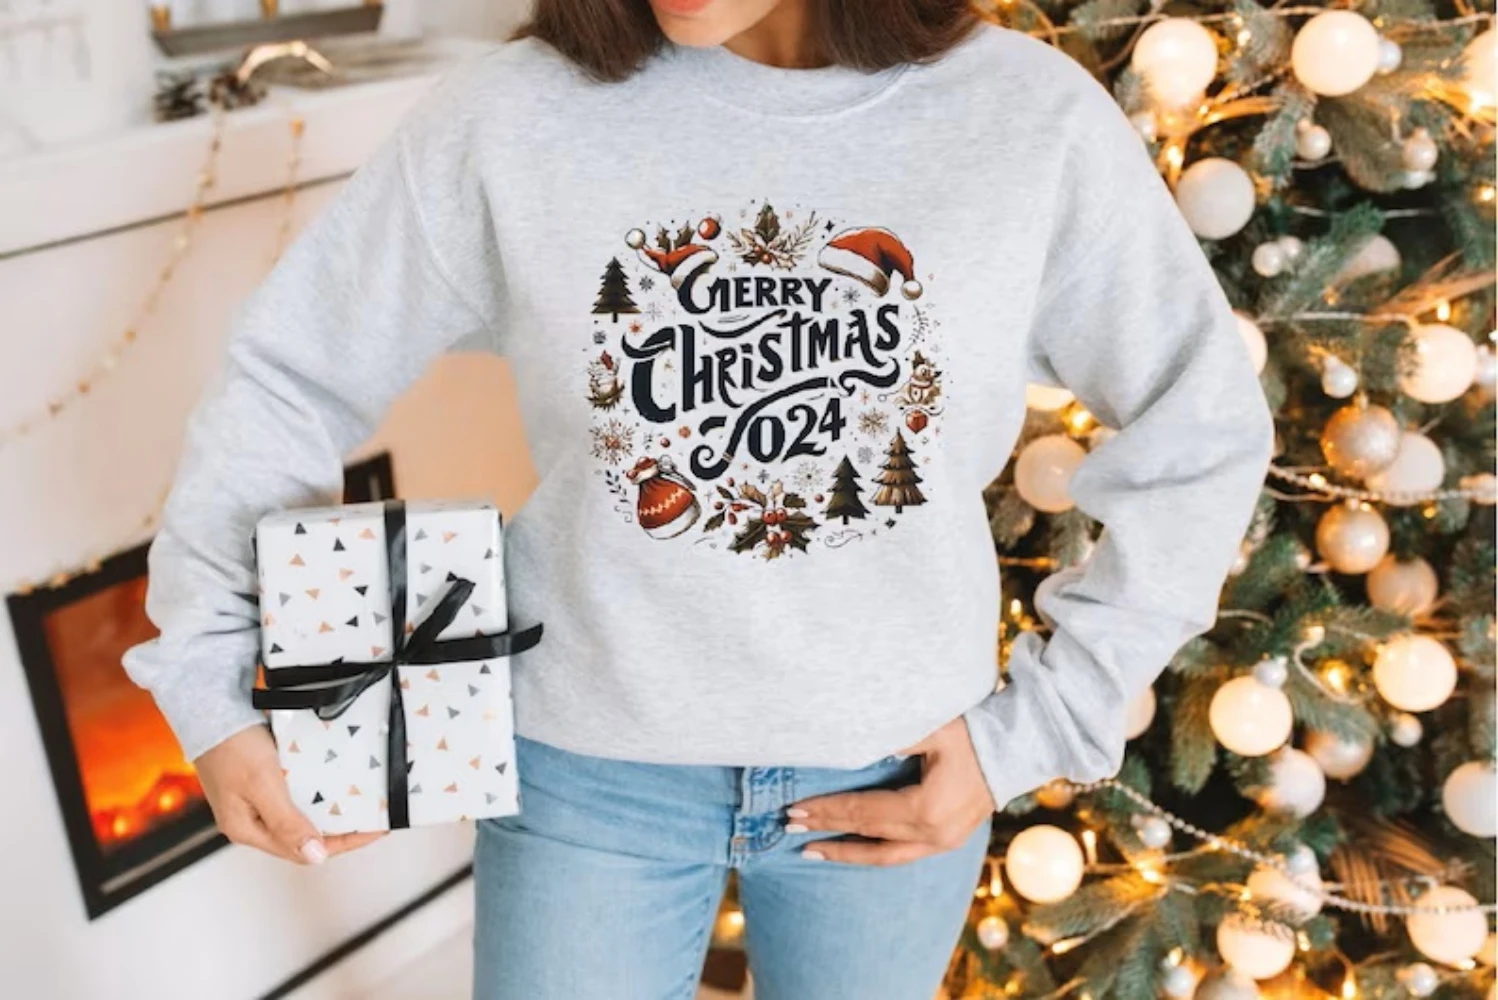 2024 Merry Christmas Sweatshirt Happy Holiday Crewneck Pullover Top Cute Funny Shirt Celebrate New Year Winter Women Clothes